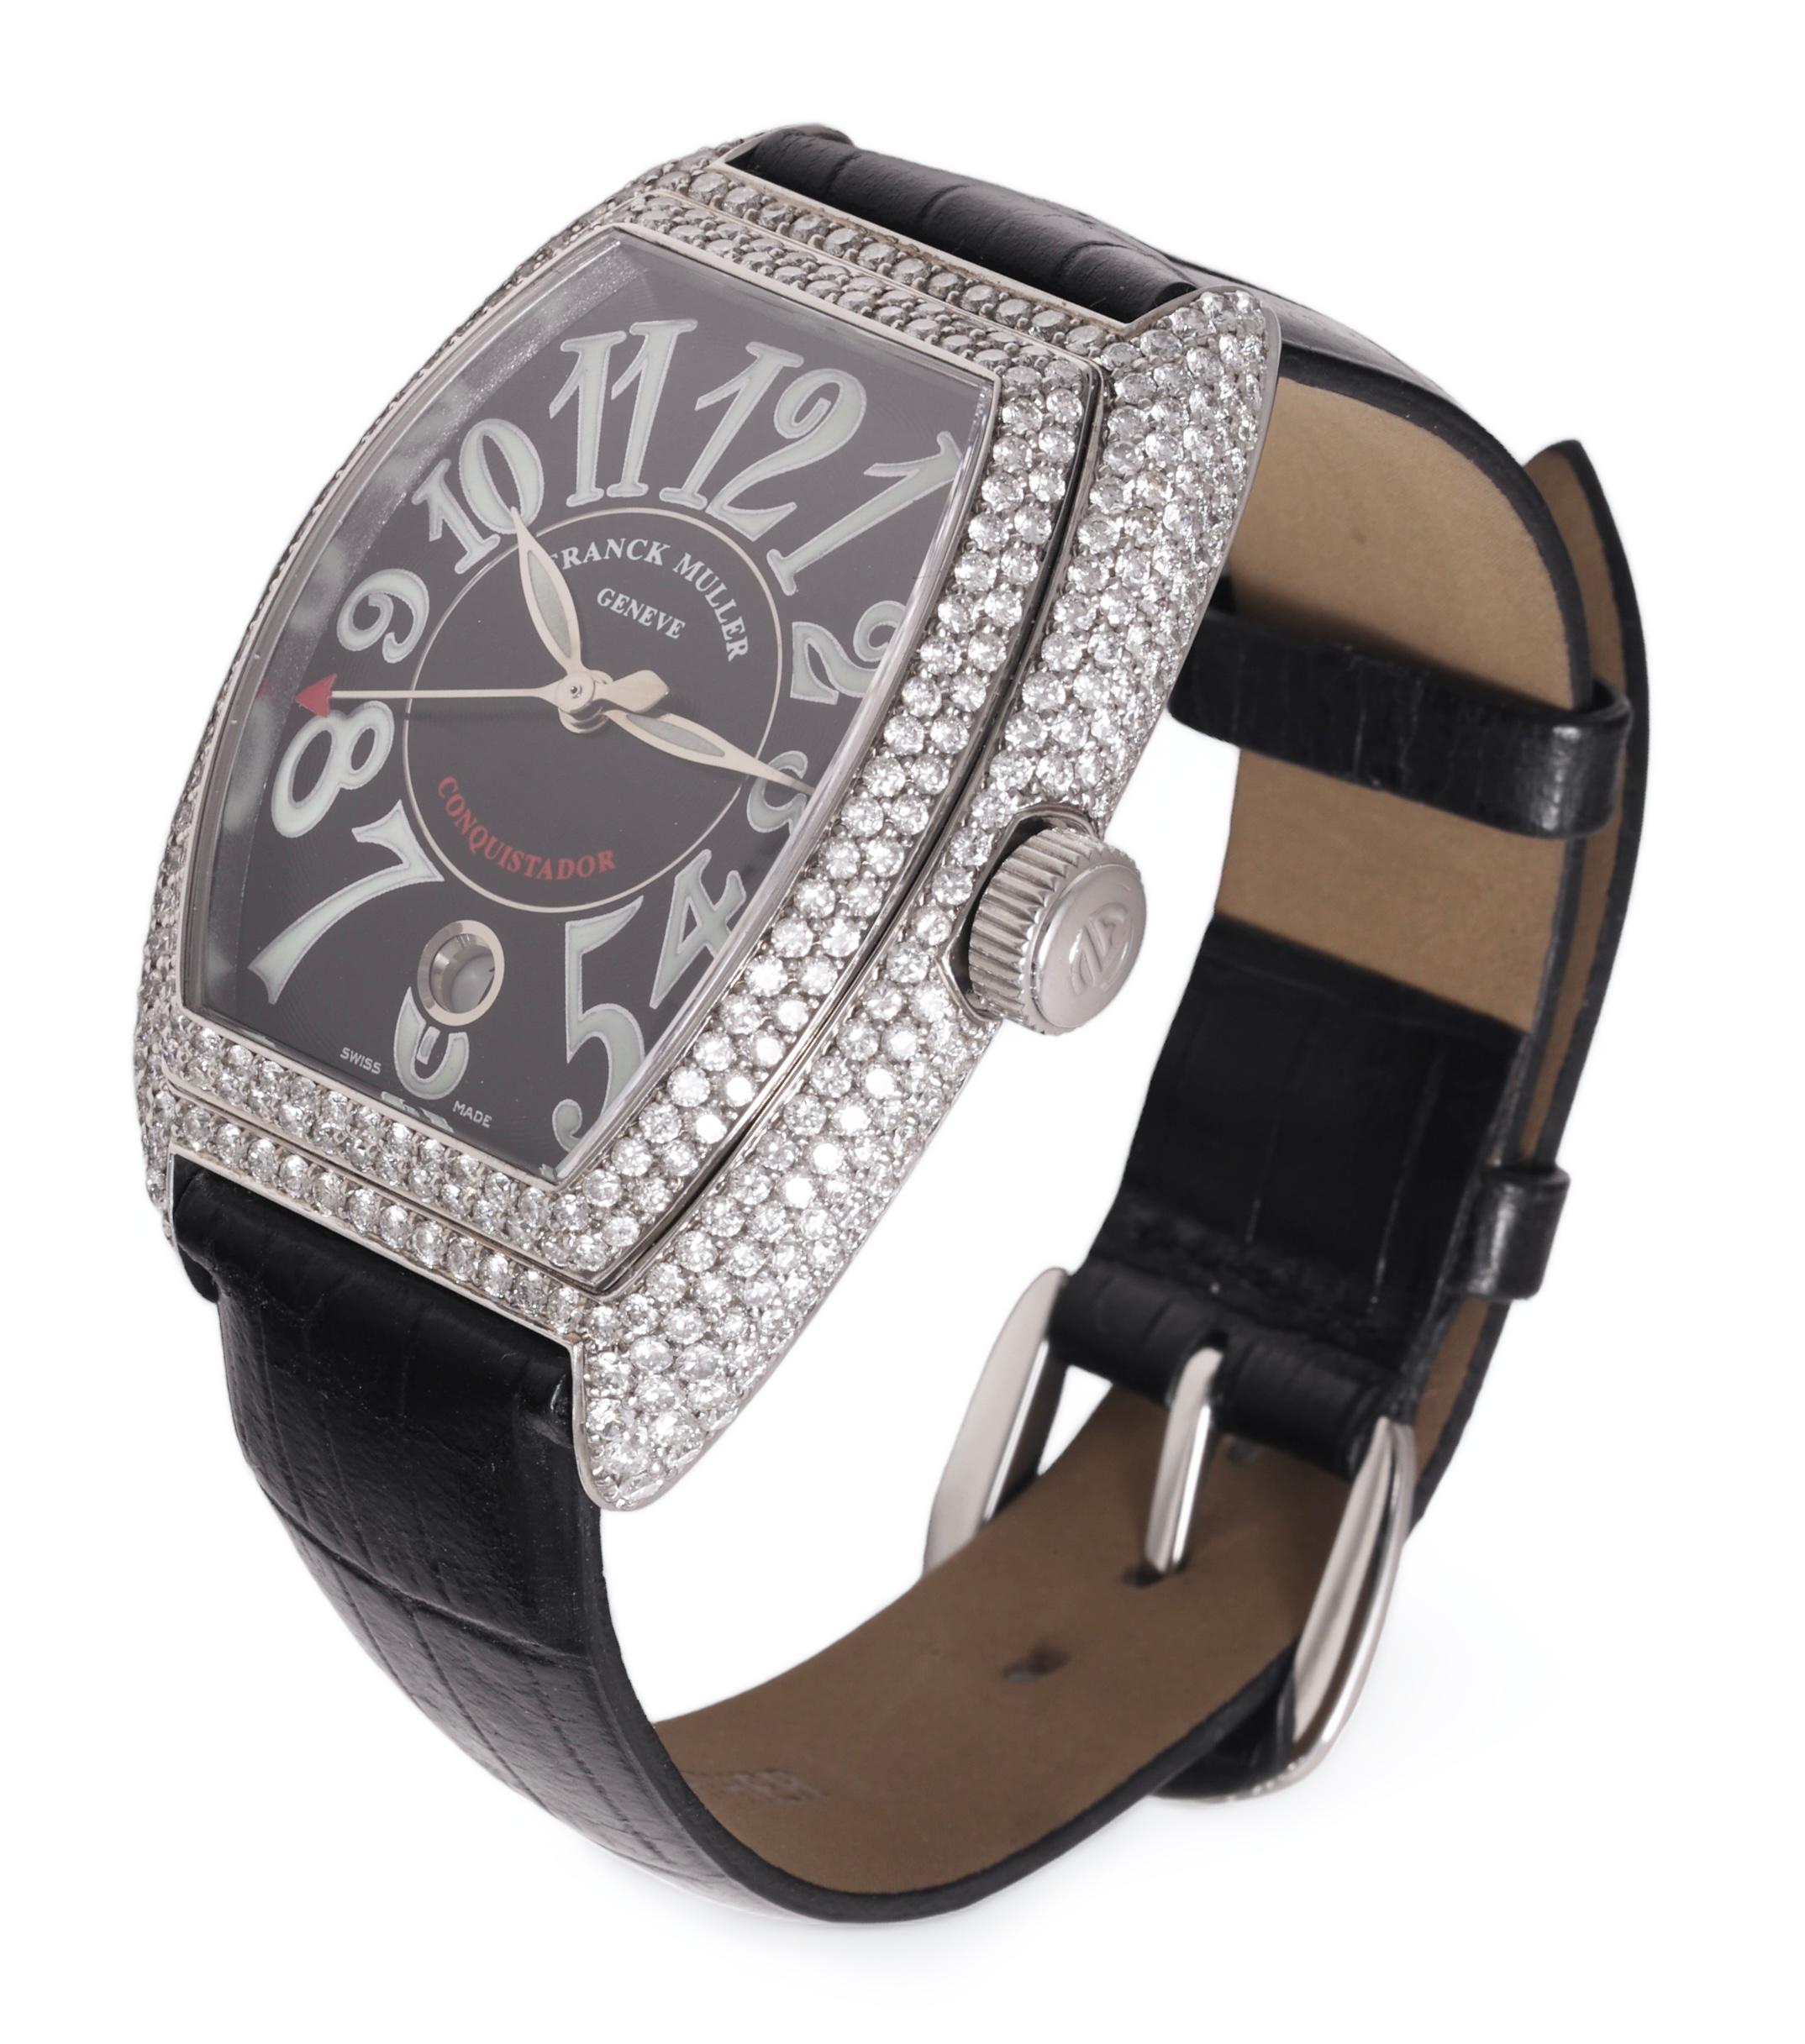 Full set Franck Muller Diamonds Conquistador Automatic Wristwatch Ref. 8001 SC

Reference number: 8001-SC

Model: Conquistador

Movement: Automatic

Case: Stainless Steel 35.5 mm x 48.5 mm x 12.6 mm, Water resistance 3 ATM, Sapphire crystal,